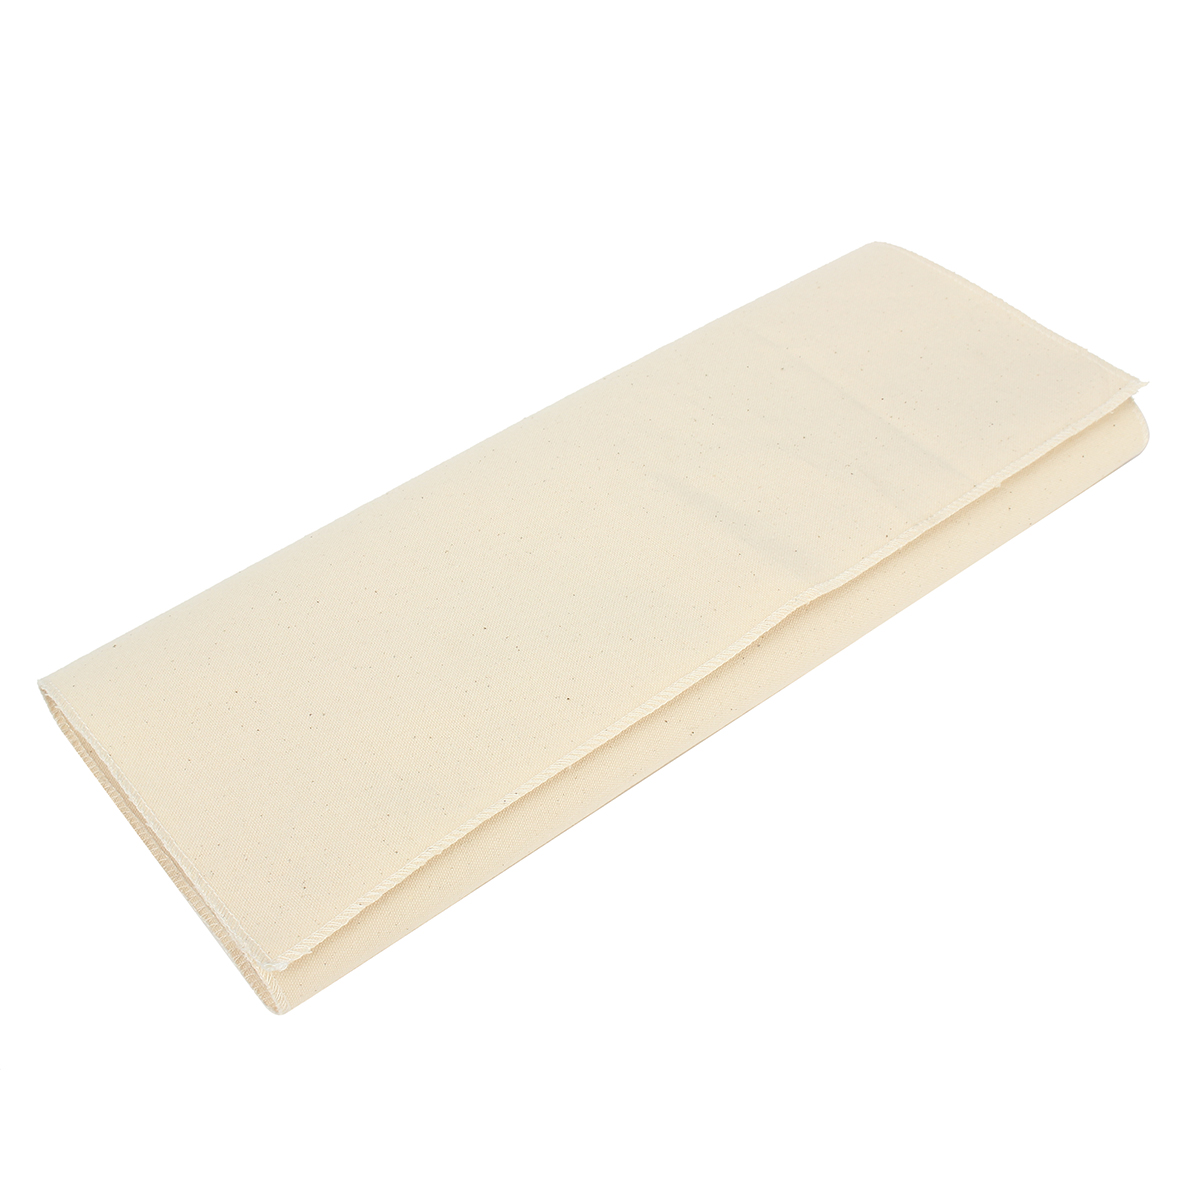 Flax-Liner-Cloth-Fiber-Cloth-Bakers-Proofing-Couche-for-Proving-Bread-Pans-Kitchen-Tool-Fermentation-1141080-2